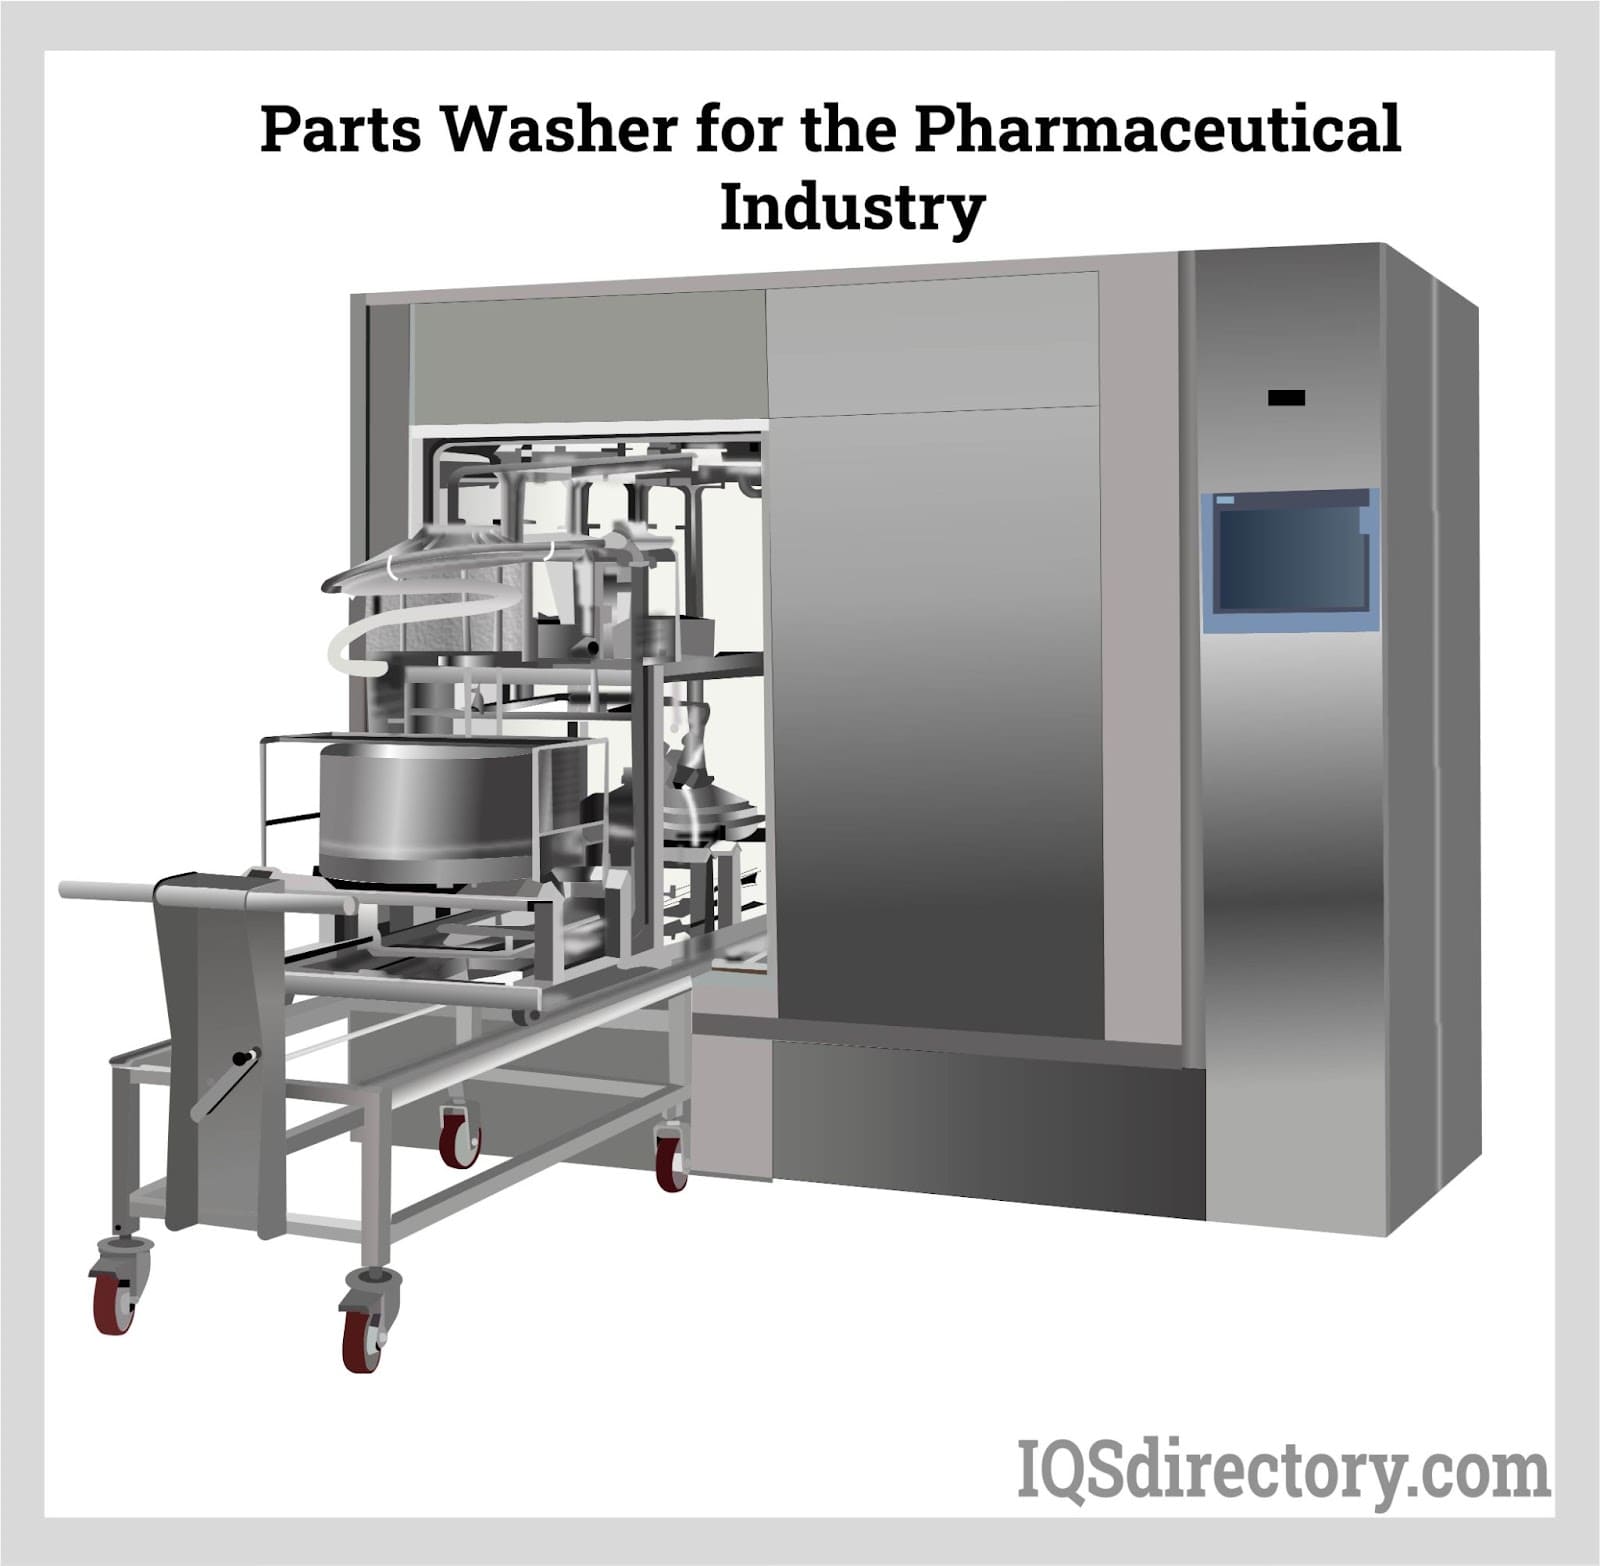 Parts Washer for the Pharmaceutical Industry